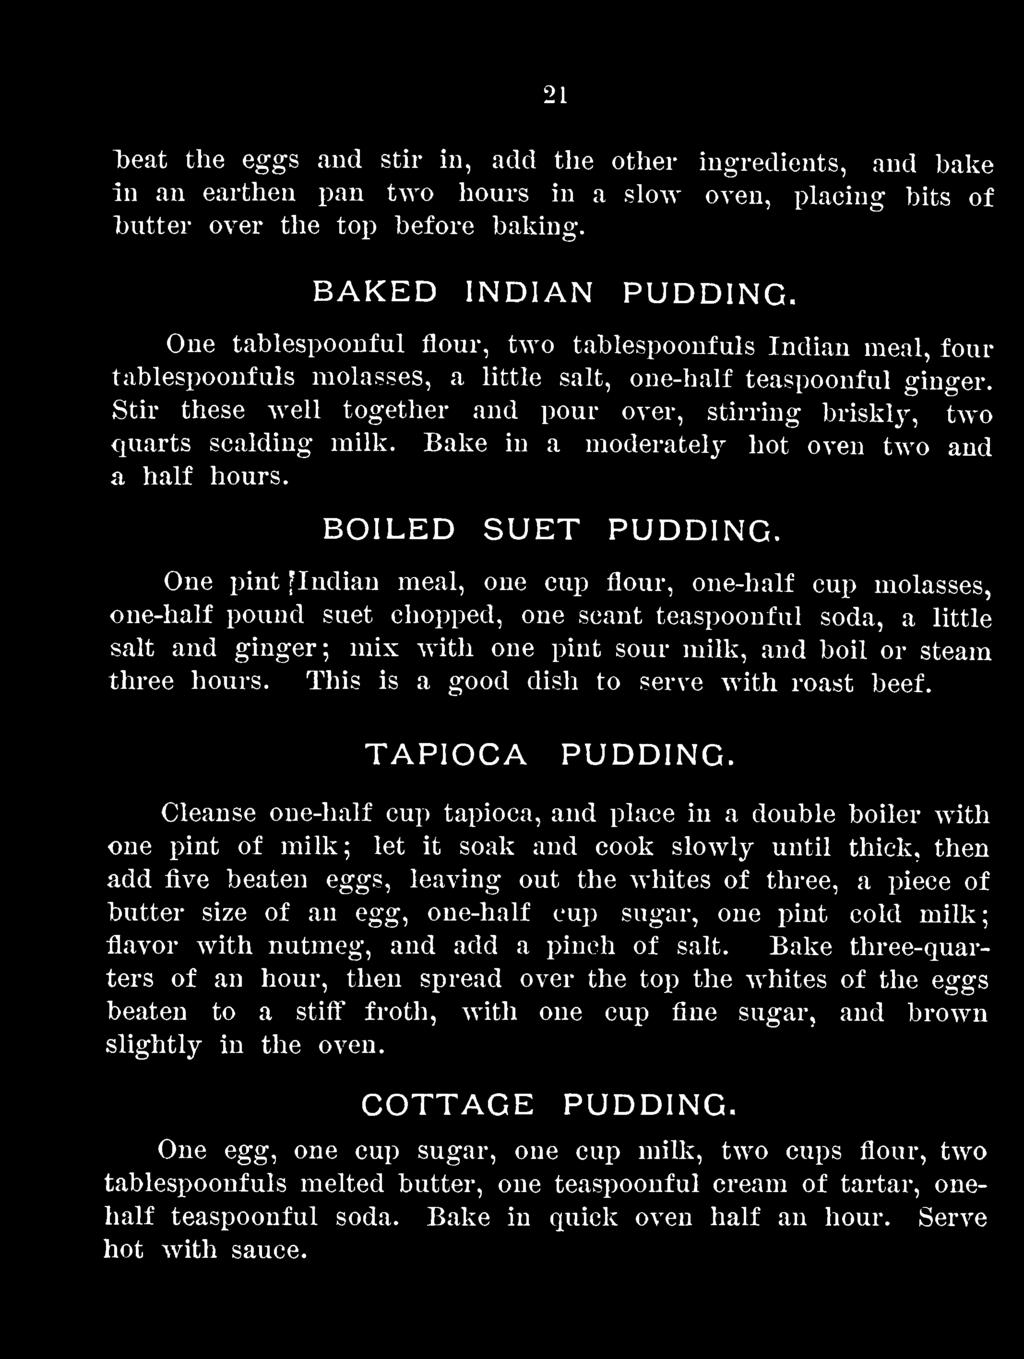 Stir these well together and pour over, stirring briskly, two quarts scalding milk. Bake in a moderately hot oven two and a half hours. BOILED SUET PUDDING.